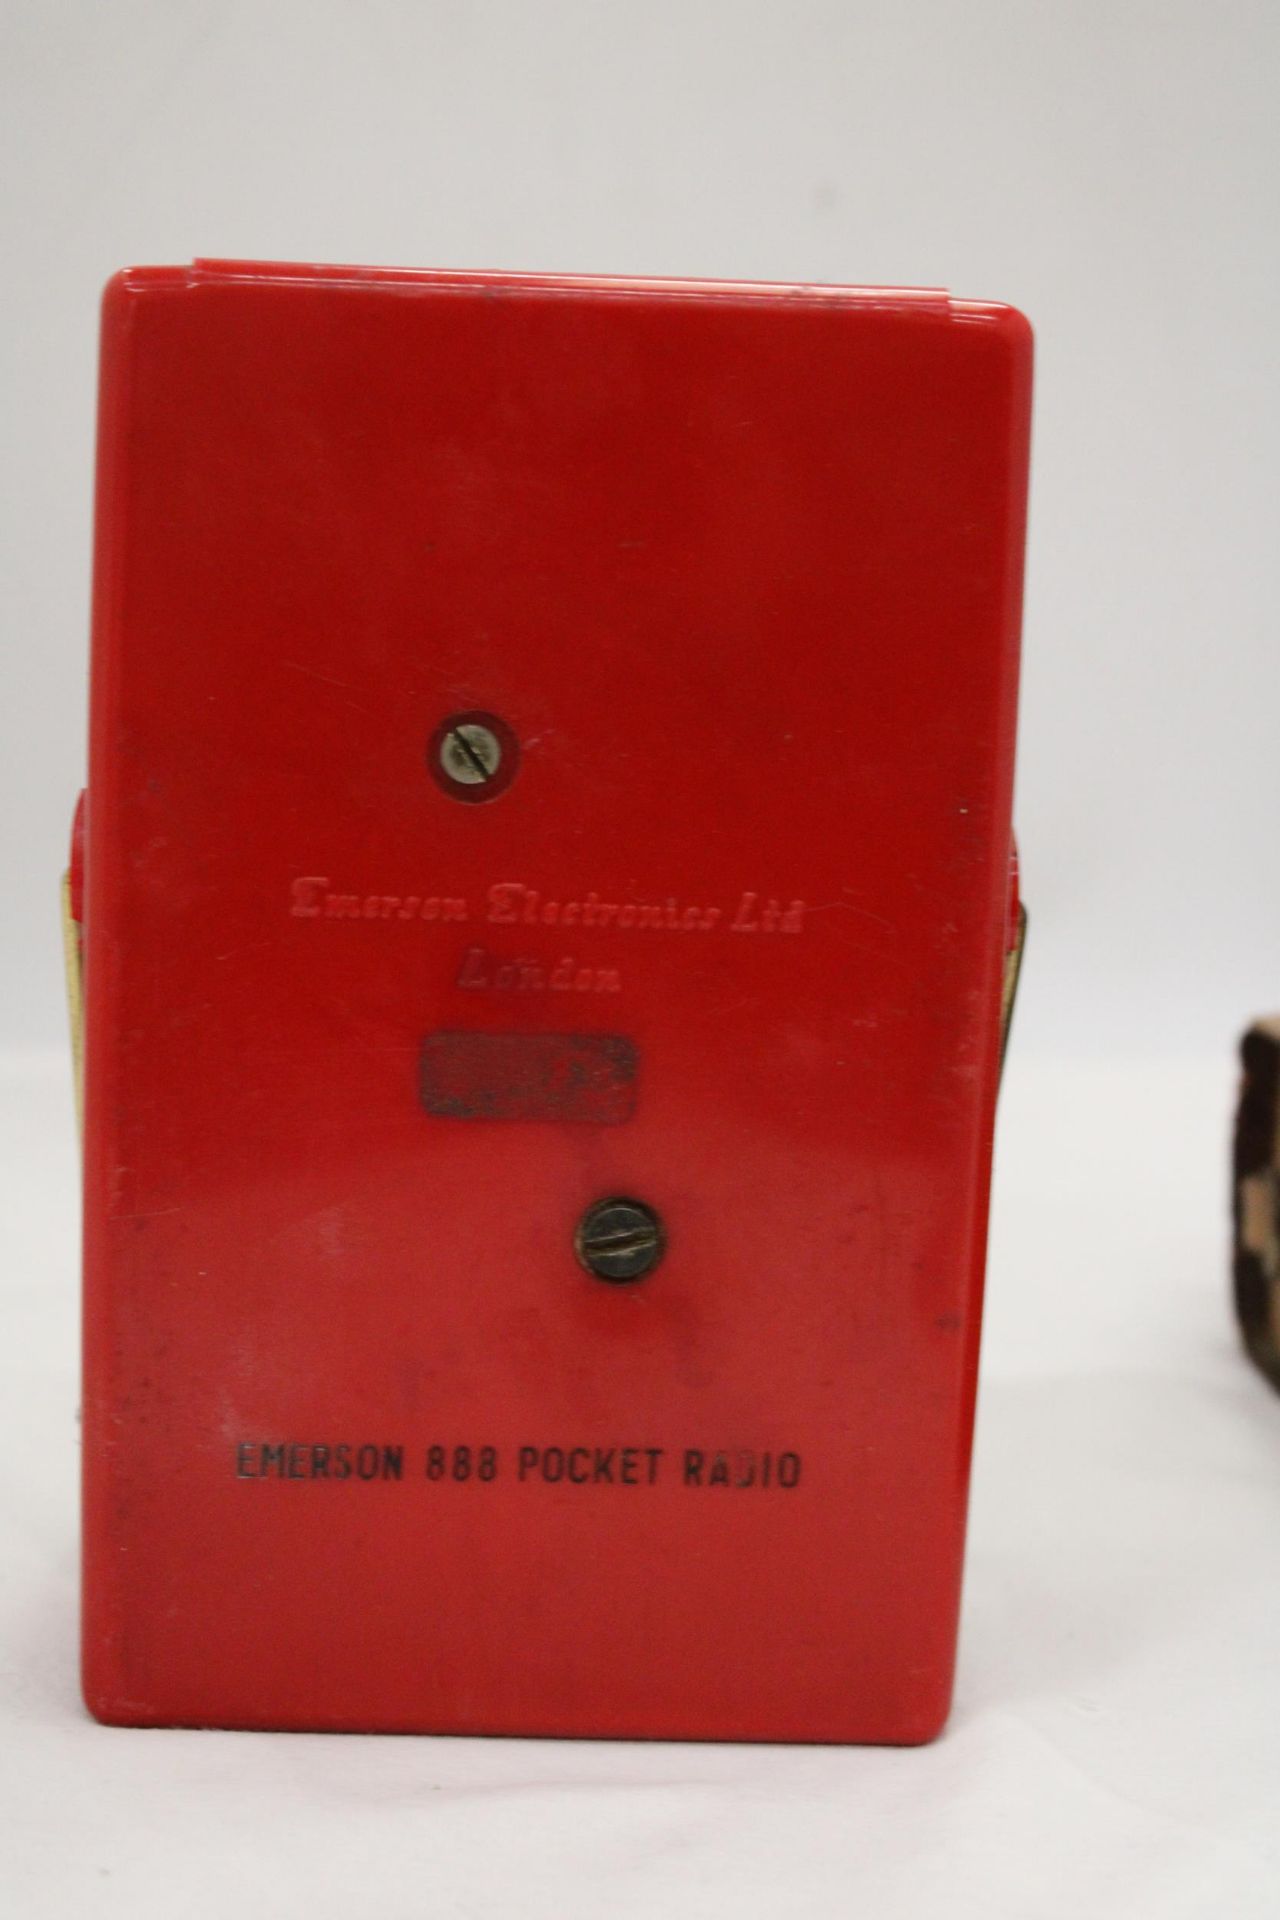 A VINTAGE EMERSON TRANSISTOR RADIO IN ORIGINAL CASE PLUS AN ORIENTAL METAL PIN TRAY WITH DRAGON - Image 5 of 6